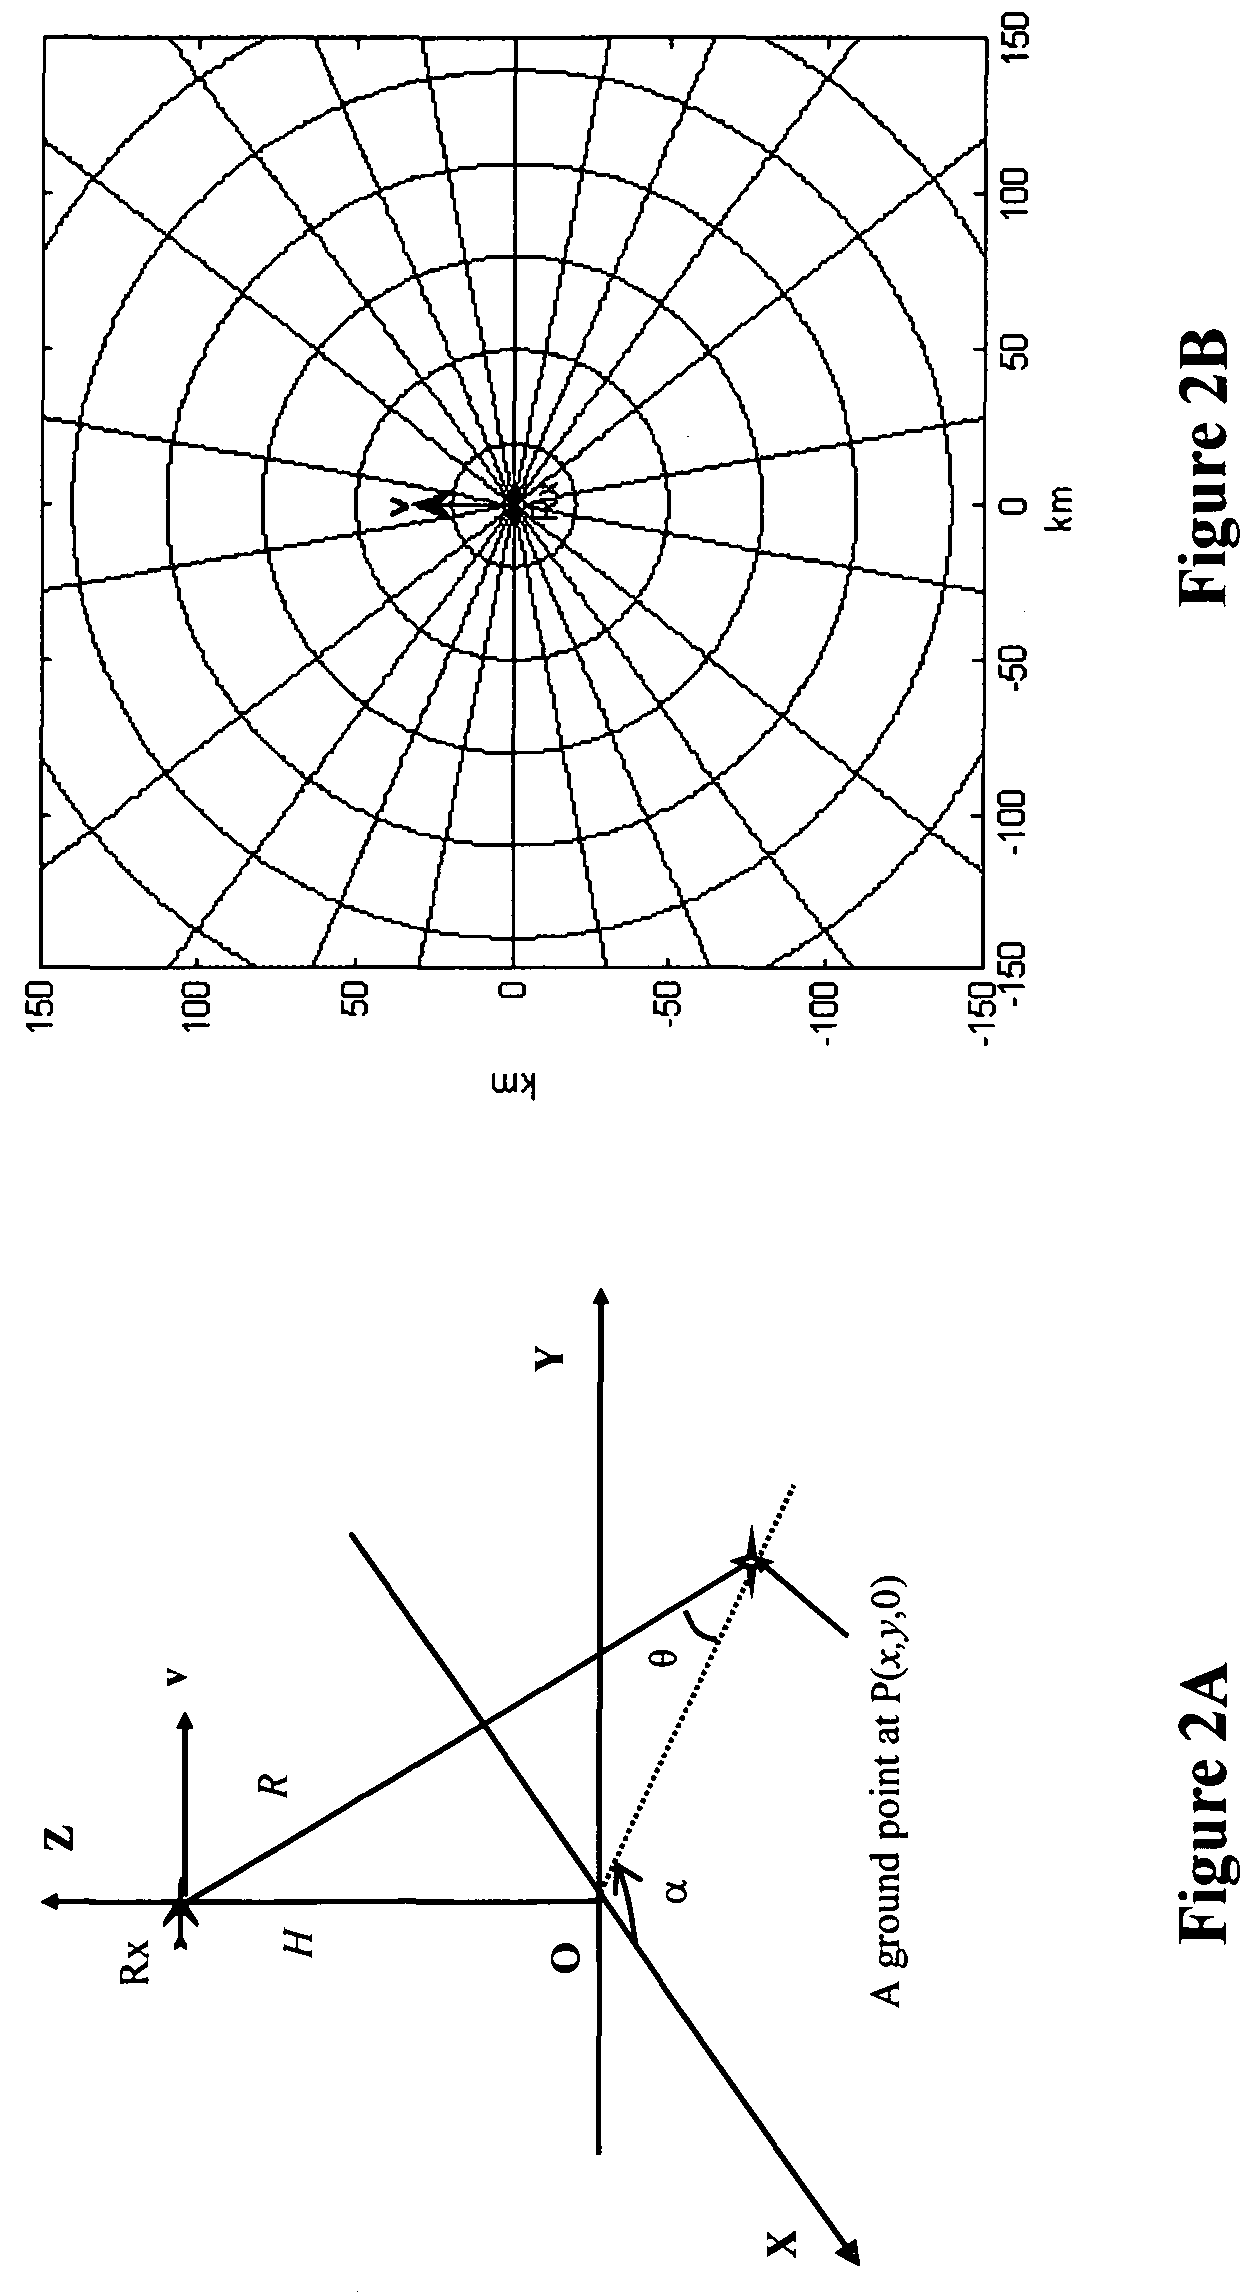 Generalized inner product method and apparatus for improved detection and discrimination